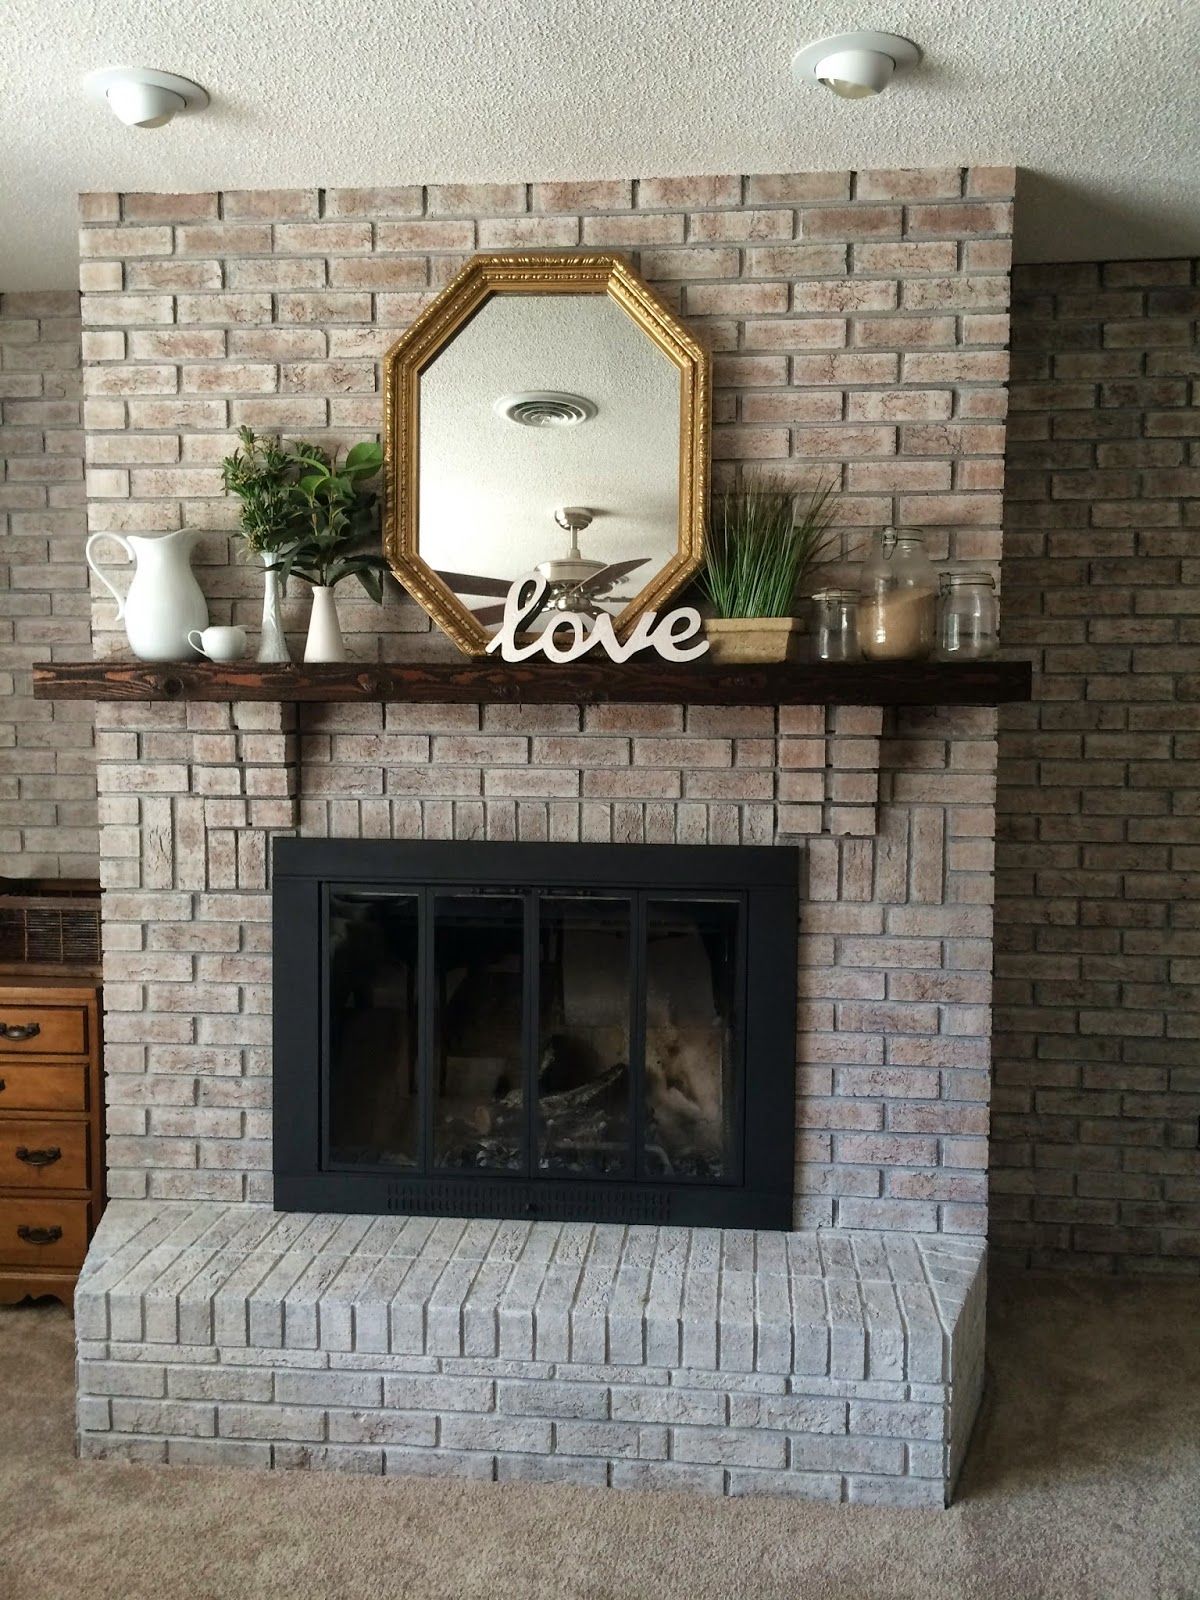 Fireplace Insert Paint Unique White Washing Brick with Gray Beige Walking with Dancers